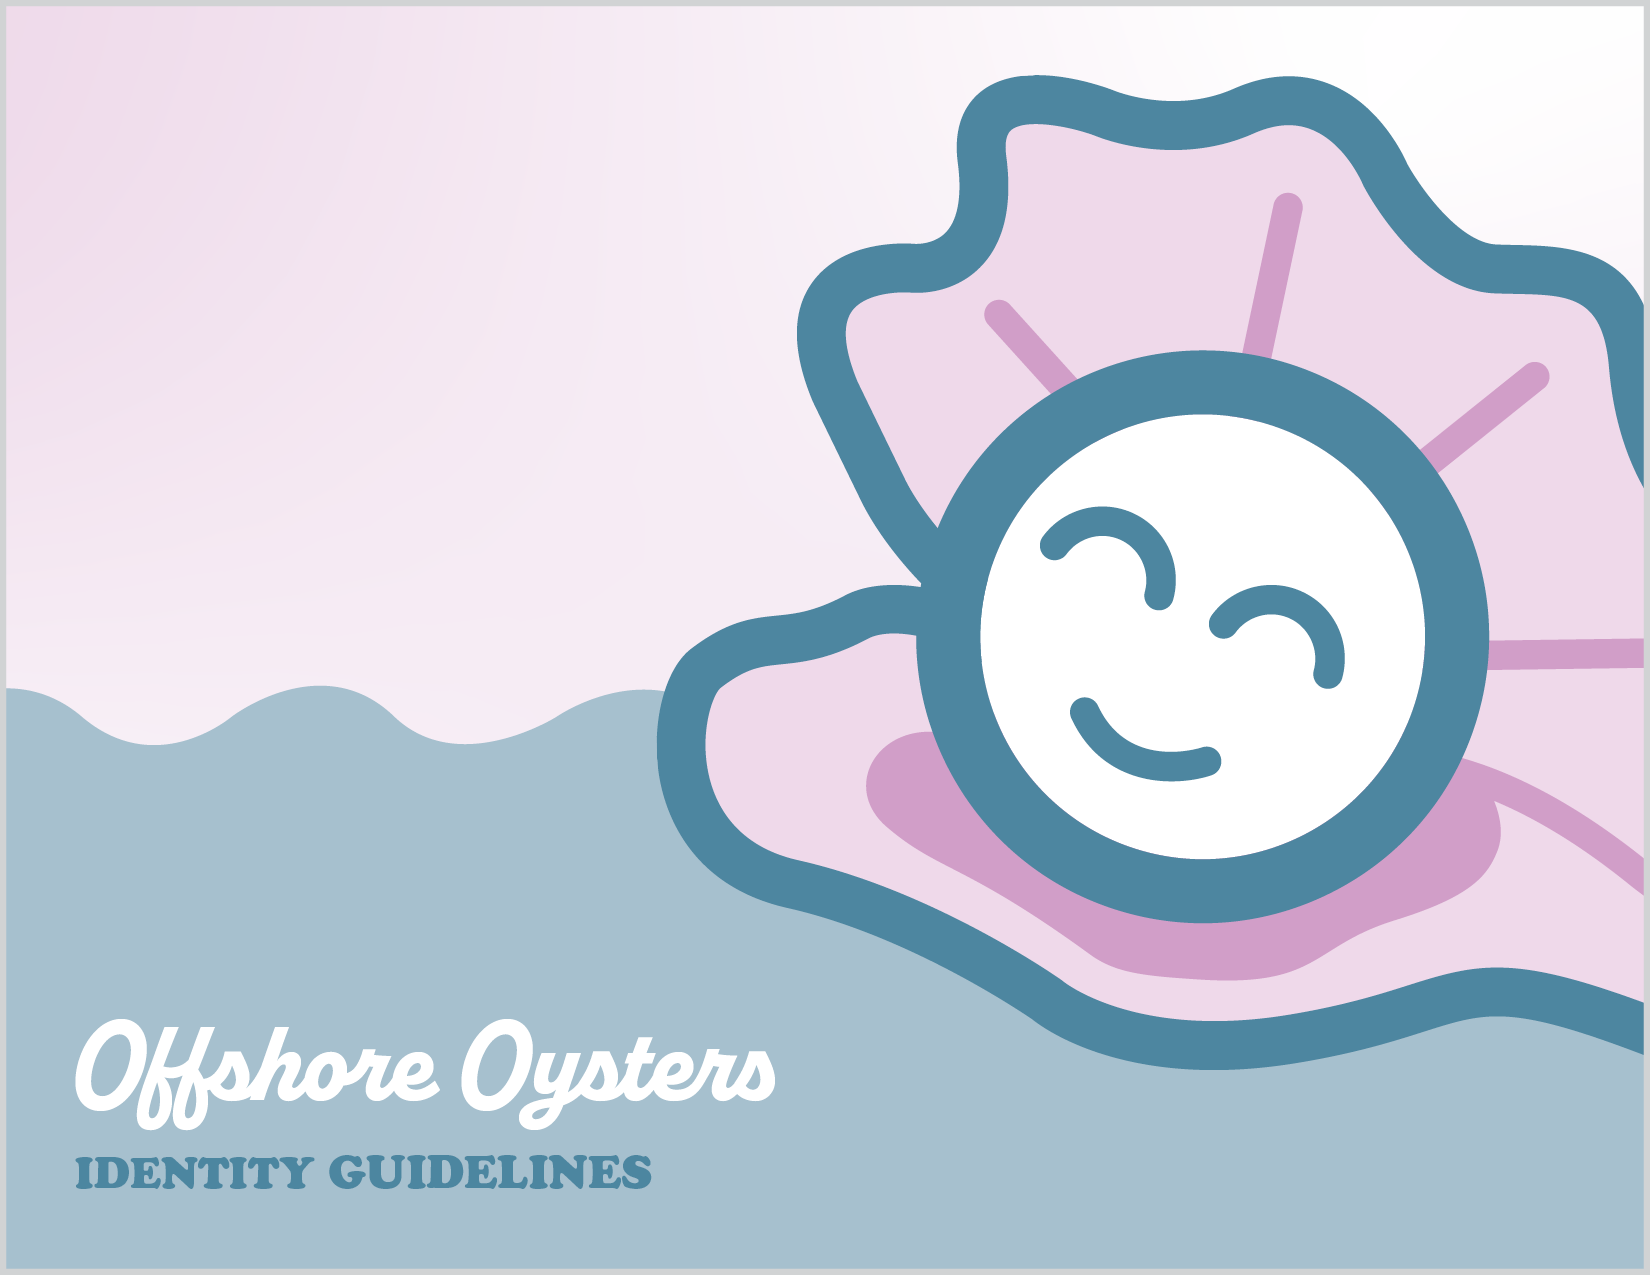 Offshore Oysters brand guideline cover page.